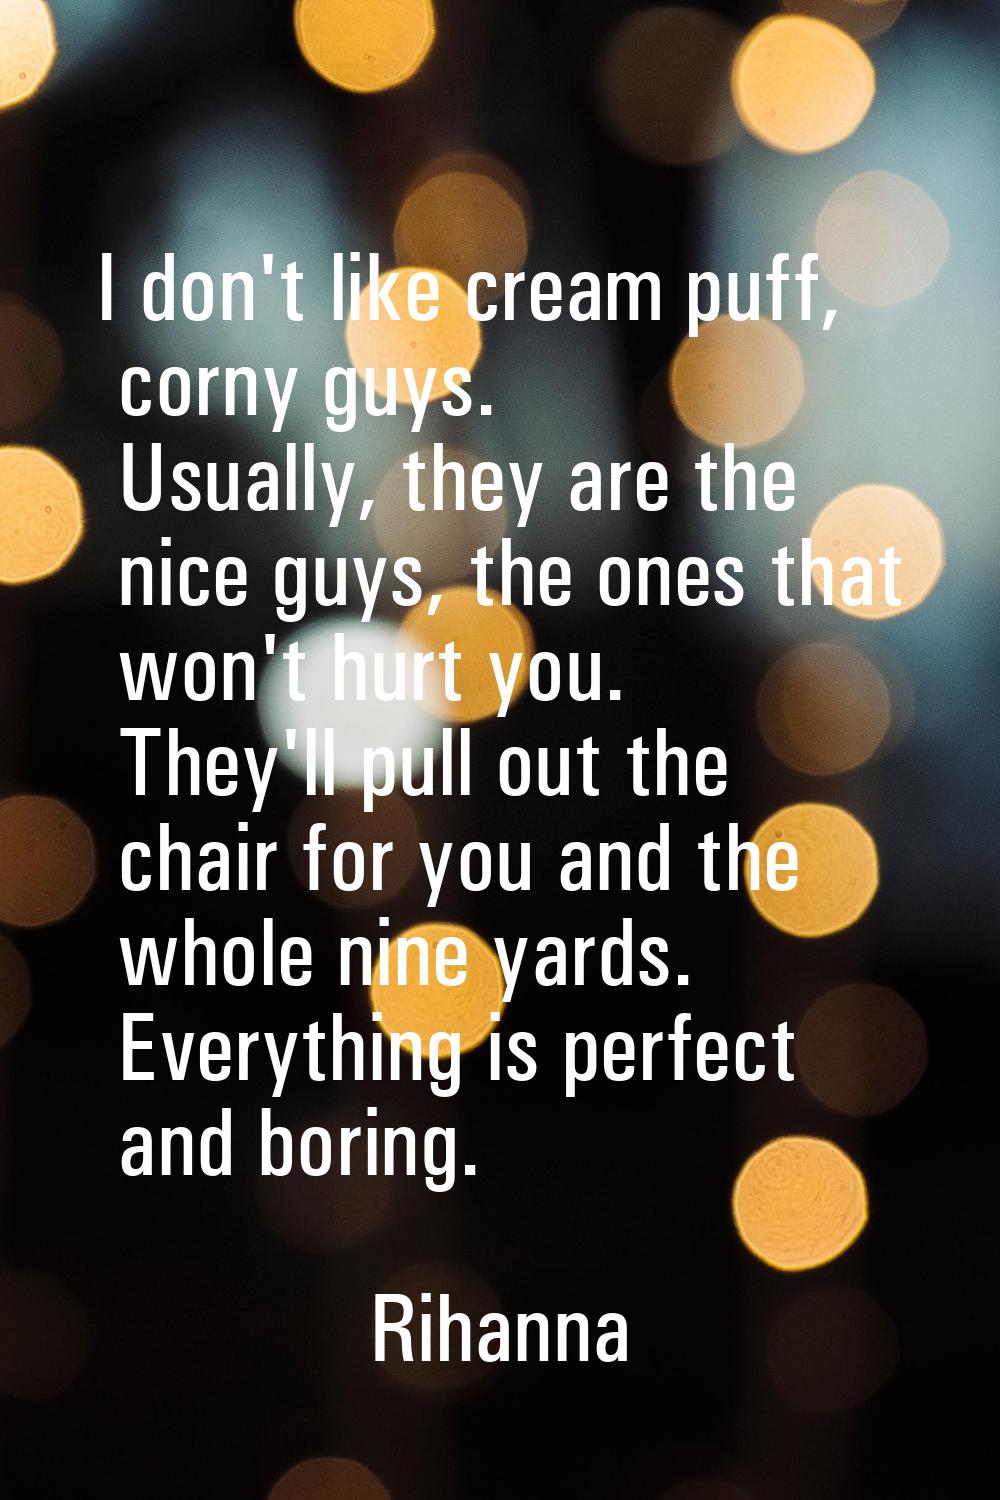 I don't like cream puff, corny guys. Usually, they are the nice guys, the ones that won't hurt you.